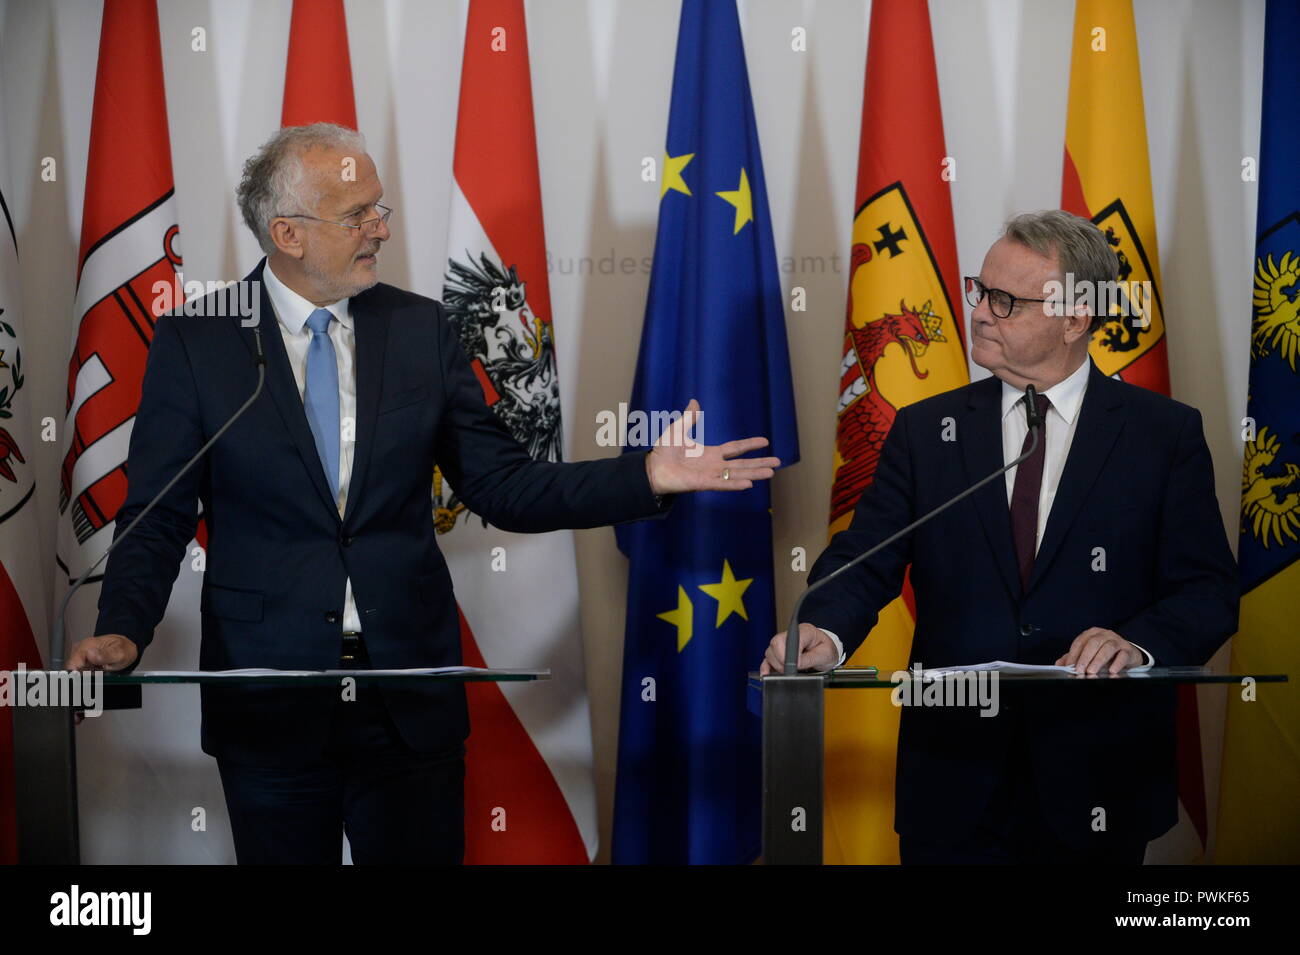 Vienna, Austria. 17 October 2018. Comment on the lack of competence between the federal government and the federal states in the press foyer of the 31st Council of Ministers at Wednesday. Picture shows (from L to R) Josef Moser (ÖVP) and Hans Niessl (SPÖ). Credit: Franz Perc/Alamy Live News Stock Photo